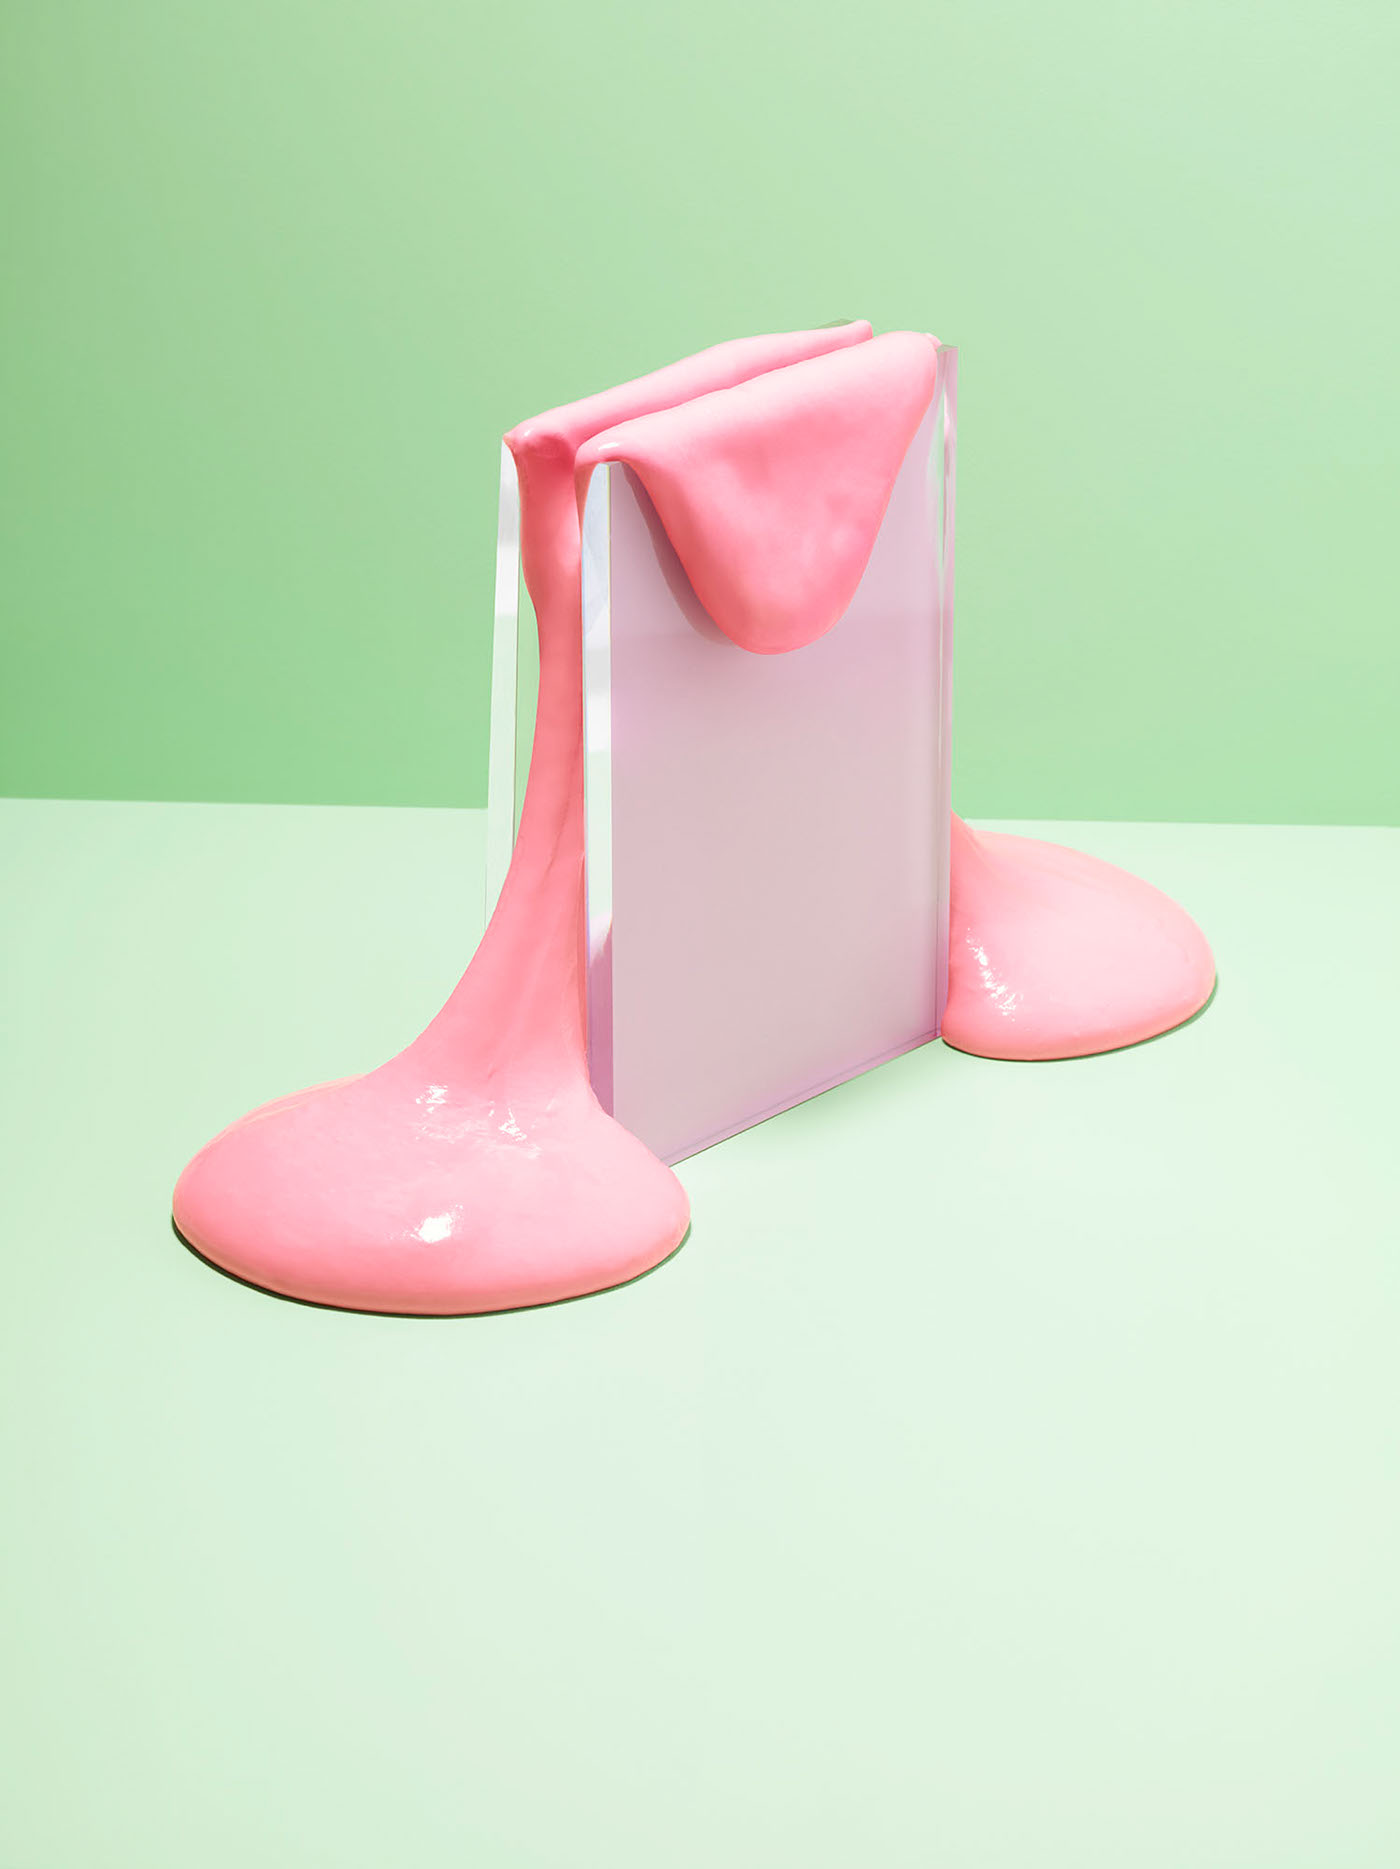 slime colour pastel color still life Fun Jonathan Knowles texture